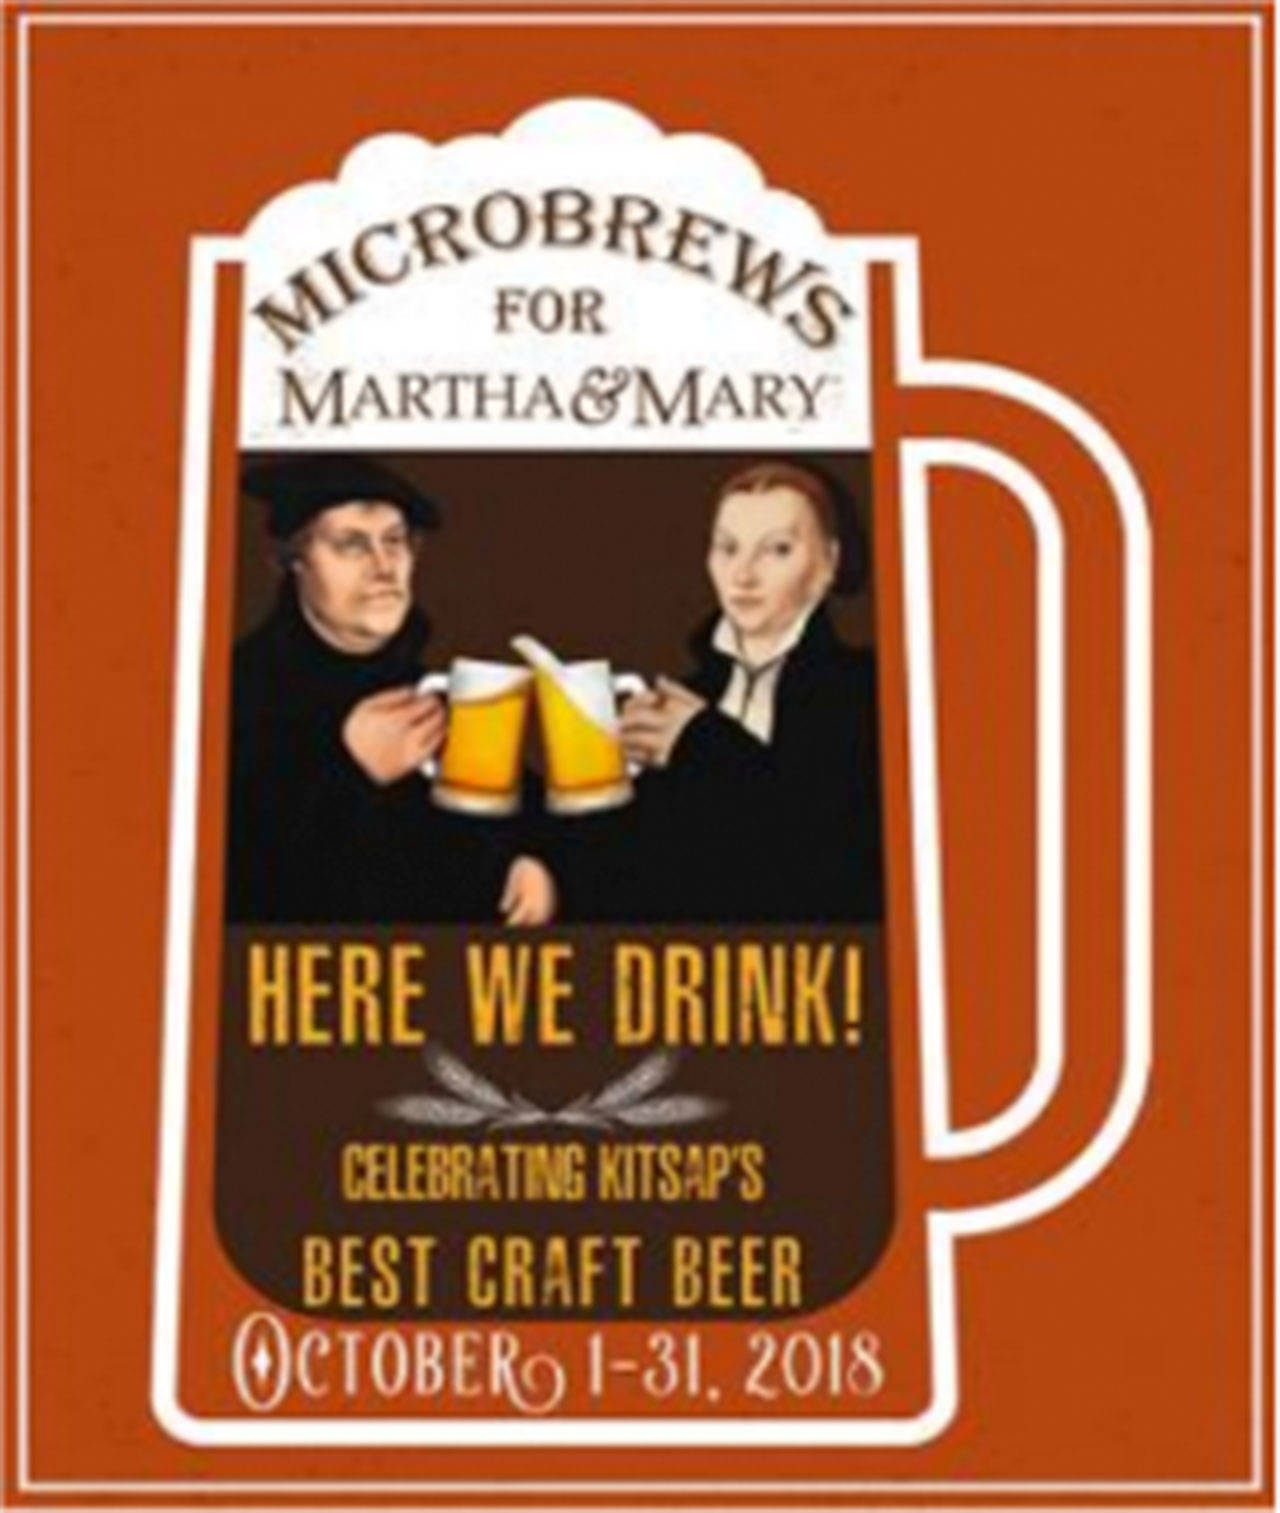 Martha & Mary to benefit from microbrew fundraiser